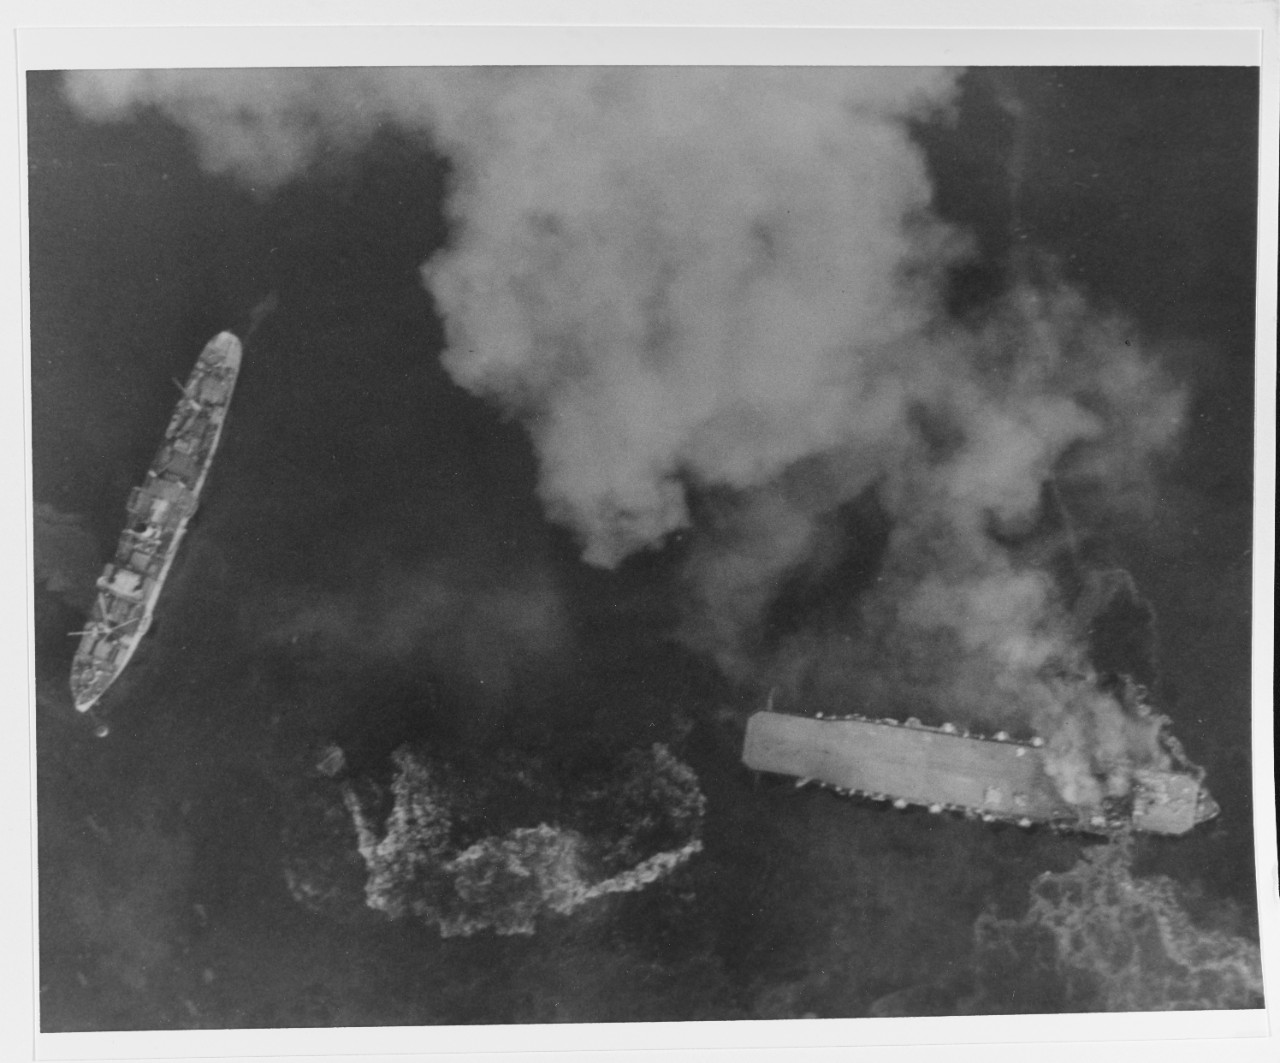 Carrier raids on Japan, March 1945